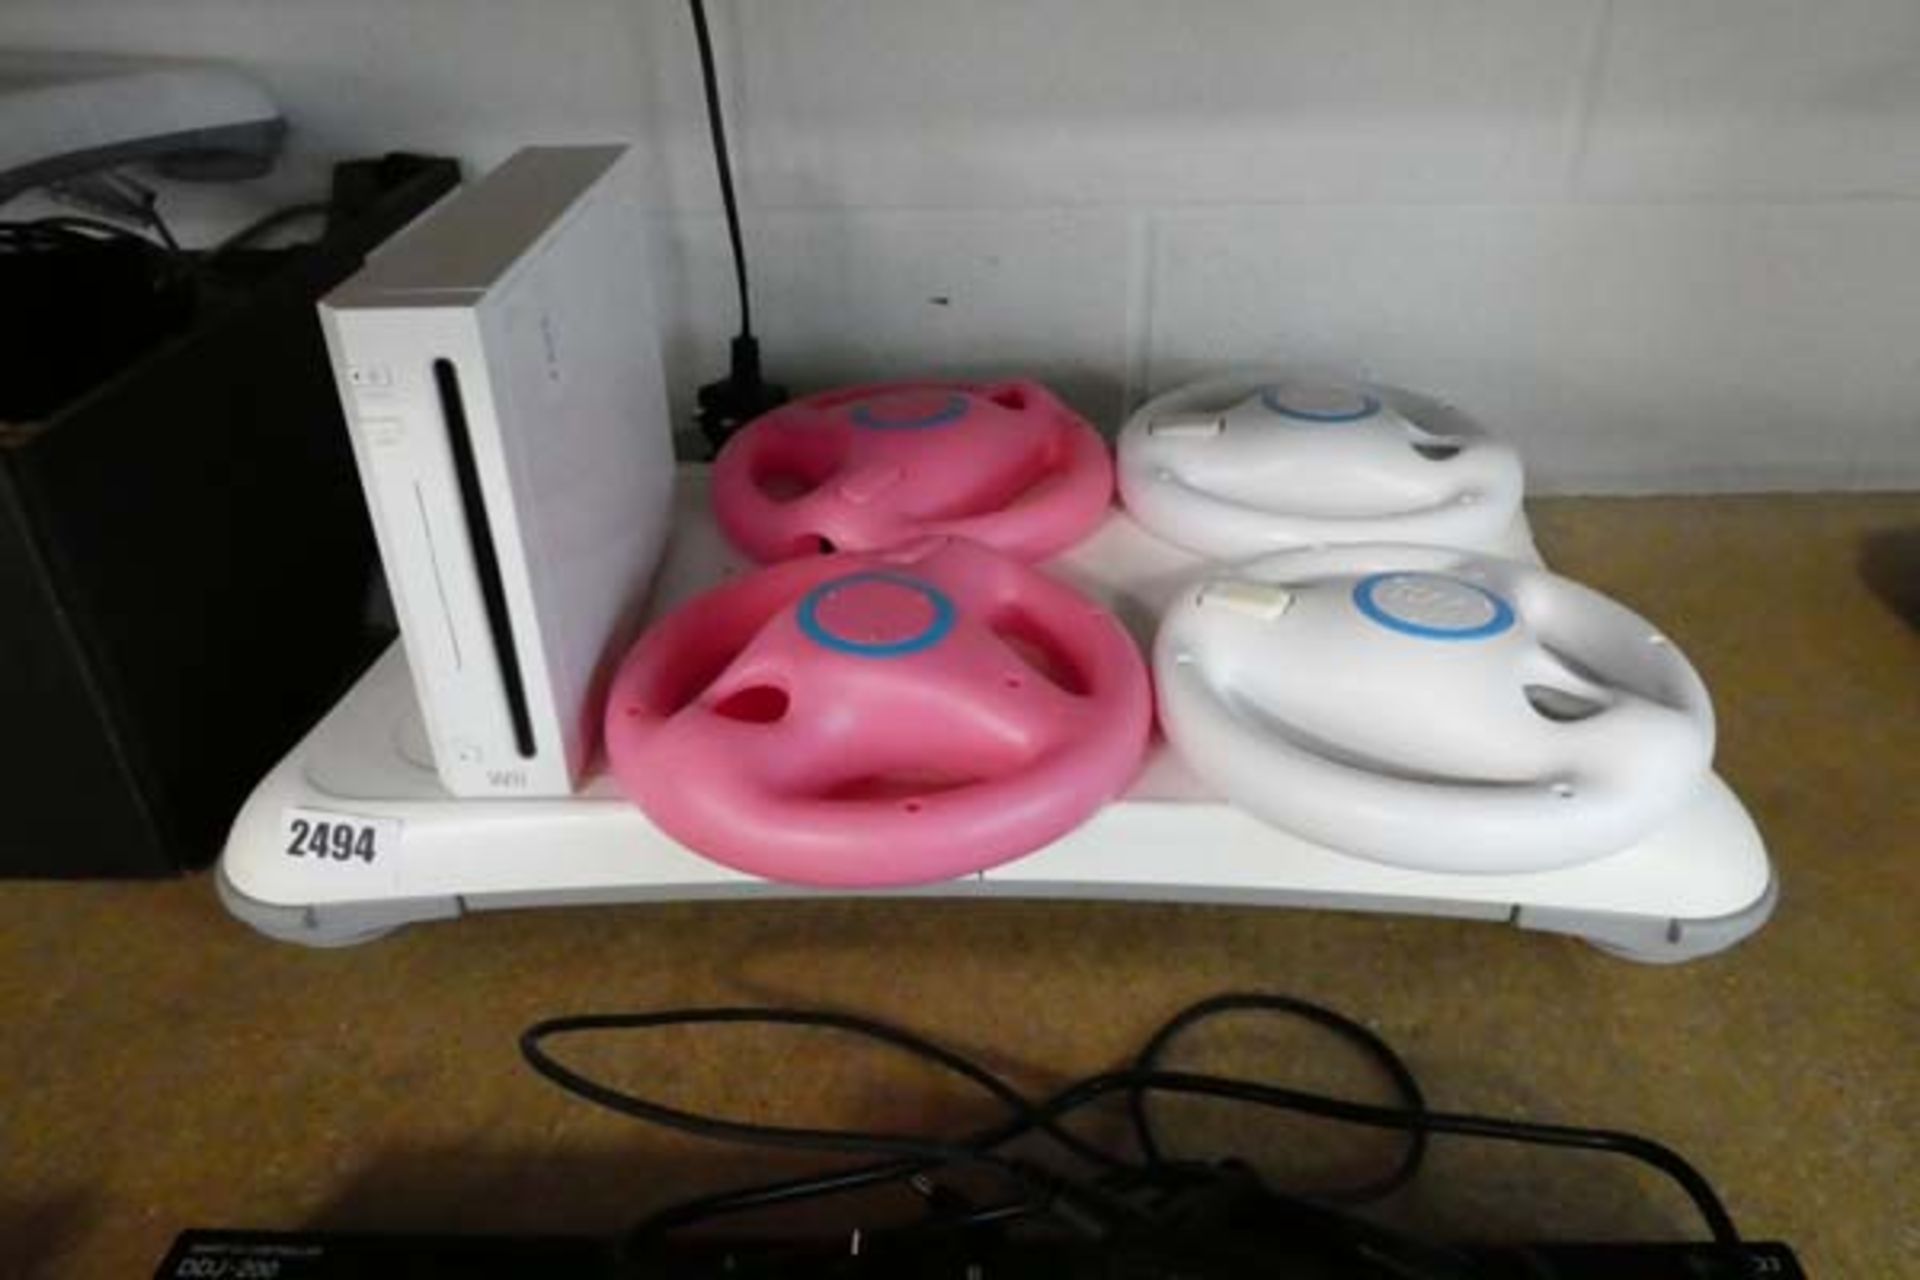 Nintendo Wii unit with balance board, steering wheel controller covers, no other accessories